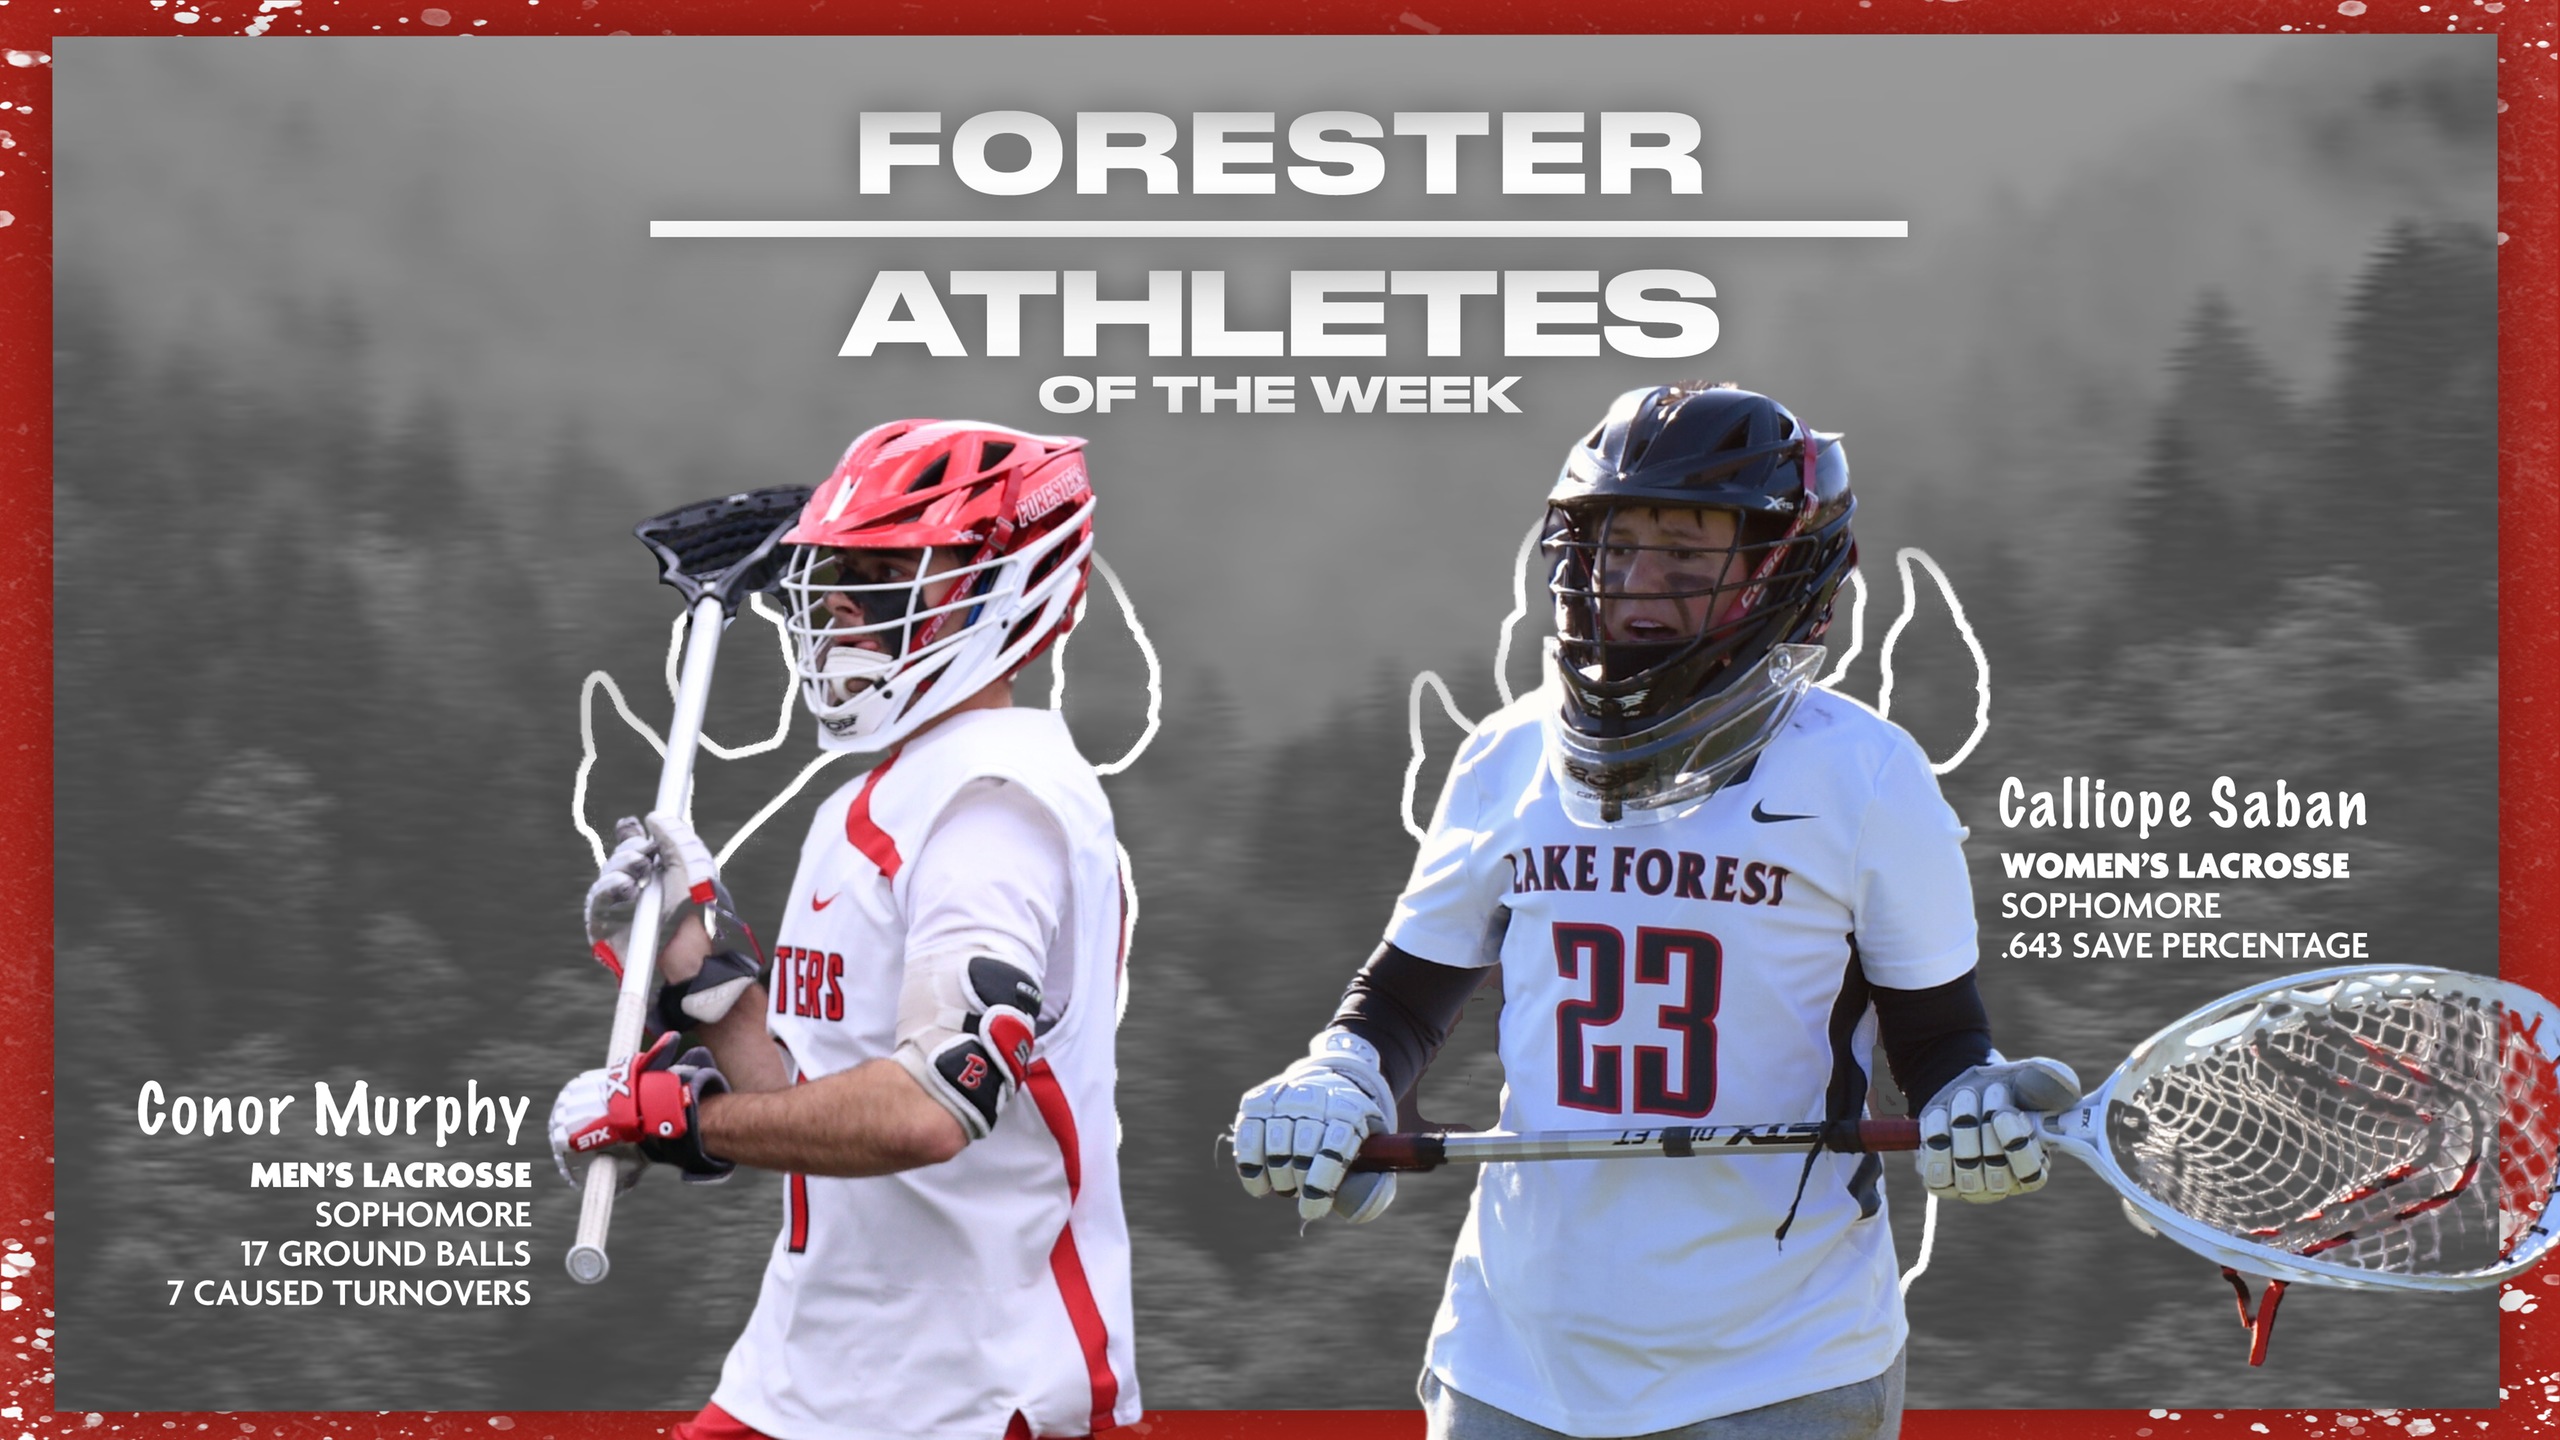 Forester Athletes of the Week: May 9